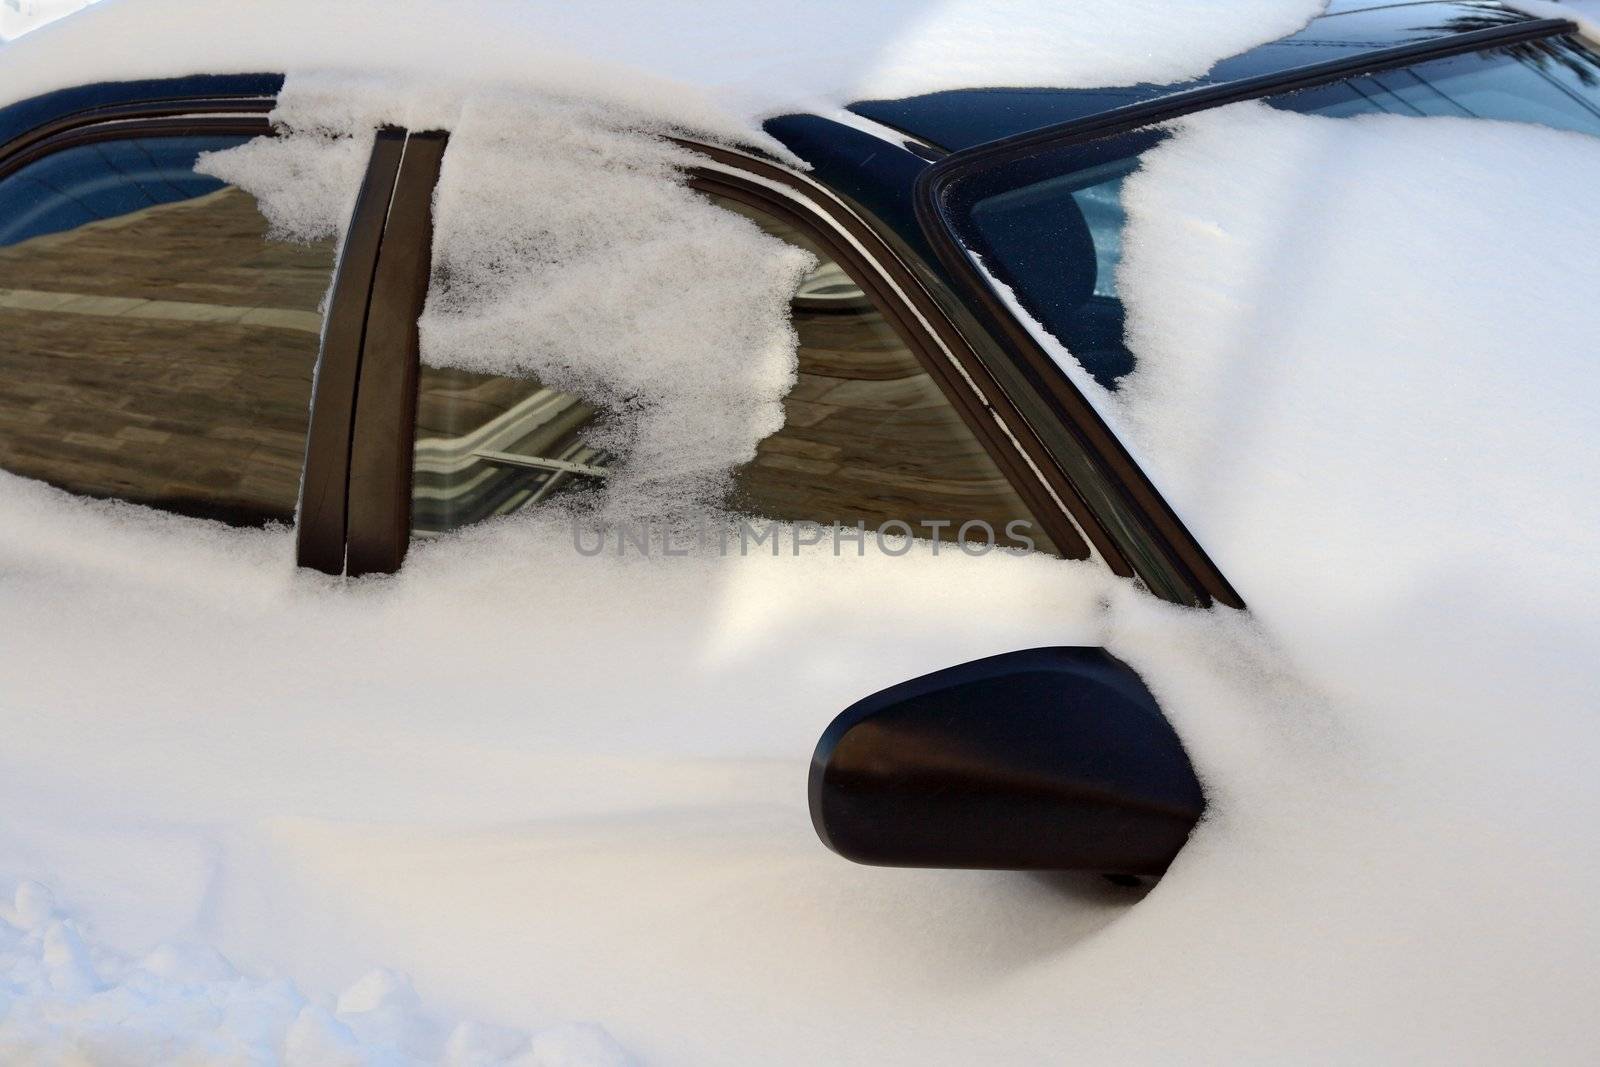 Car covered by snow after the snowstorm.